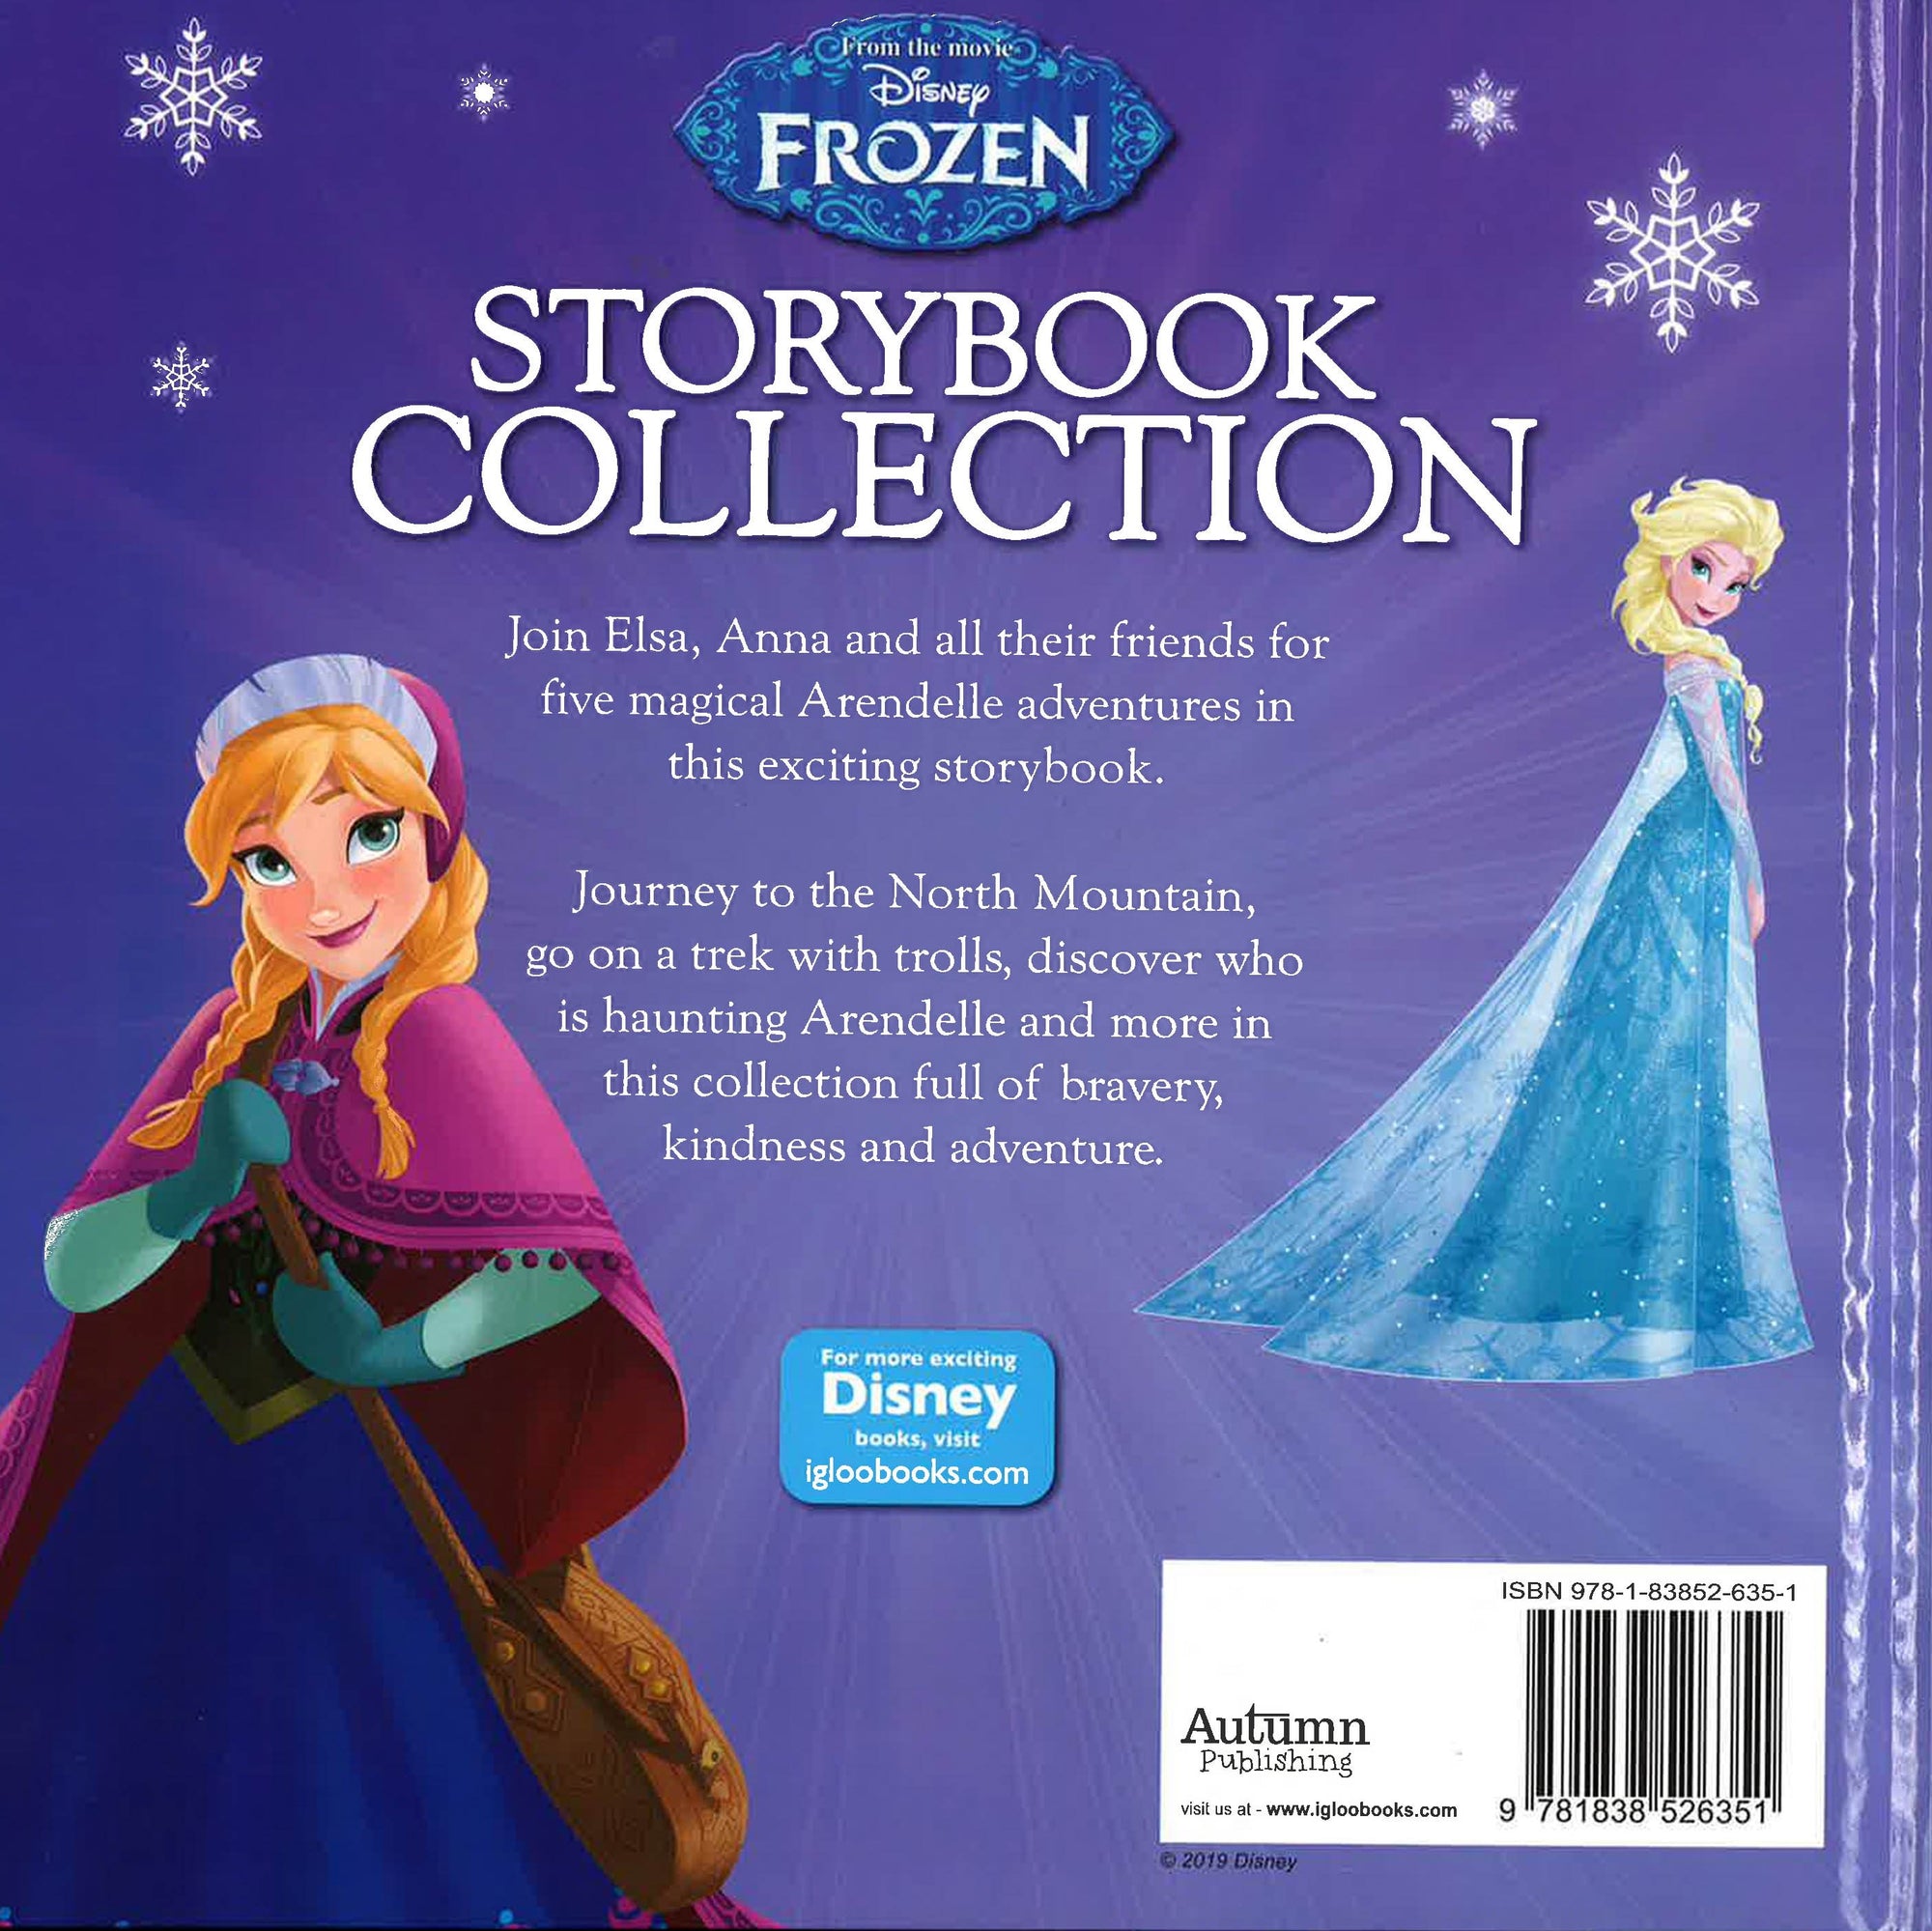 Storybook Collection Disney Disney Frozen Storybook Collection Big Bad Wolf Books Sdn Bhd 